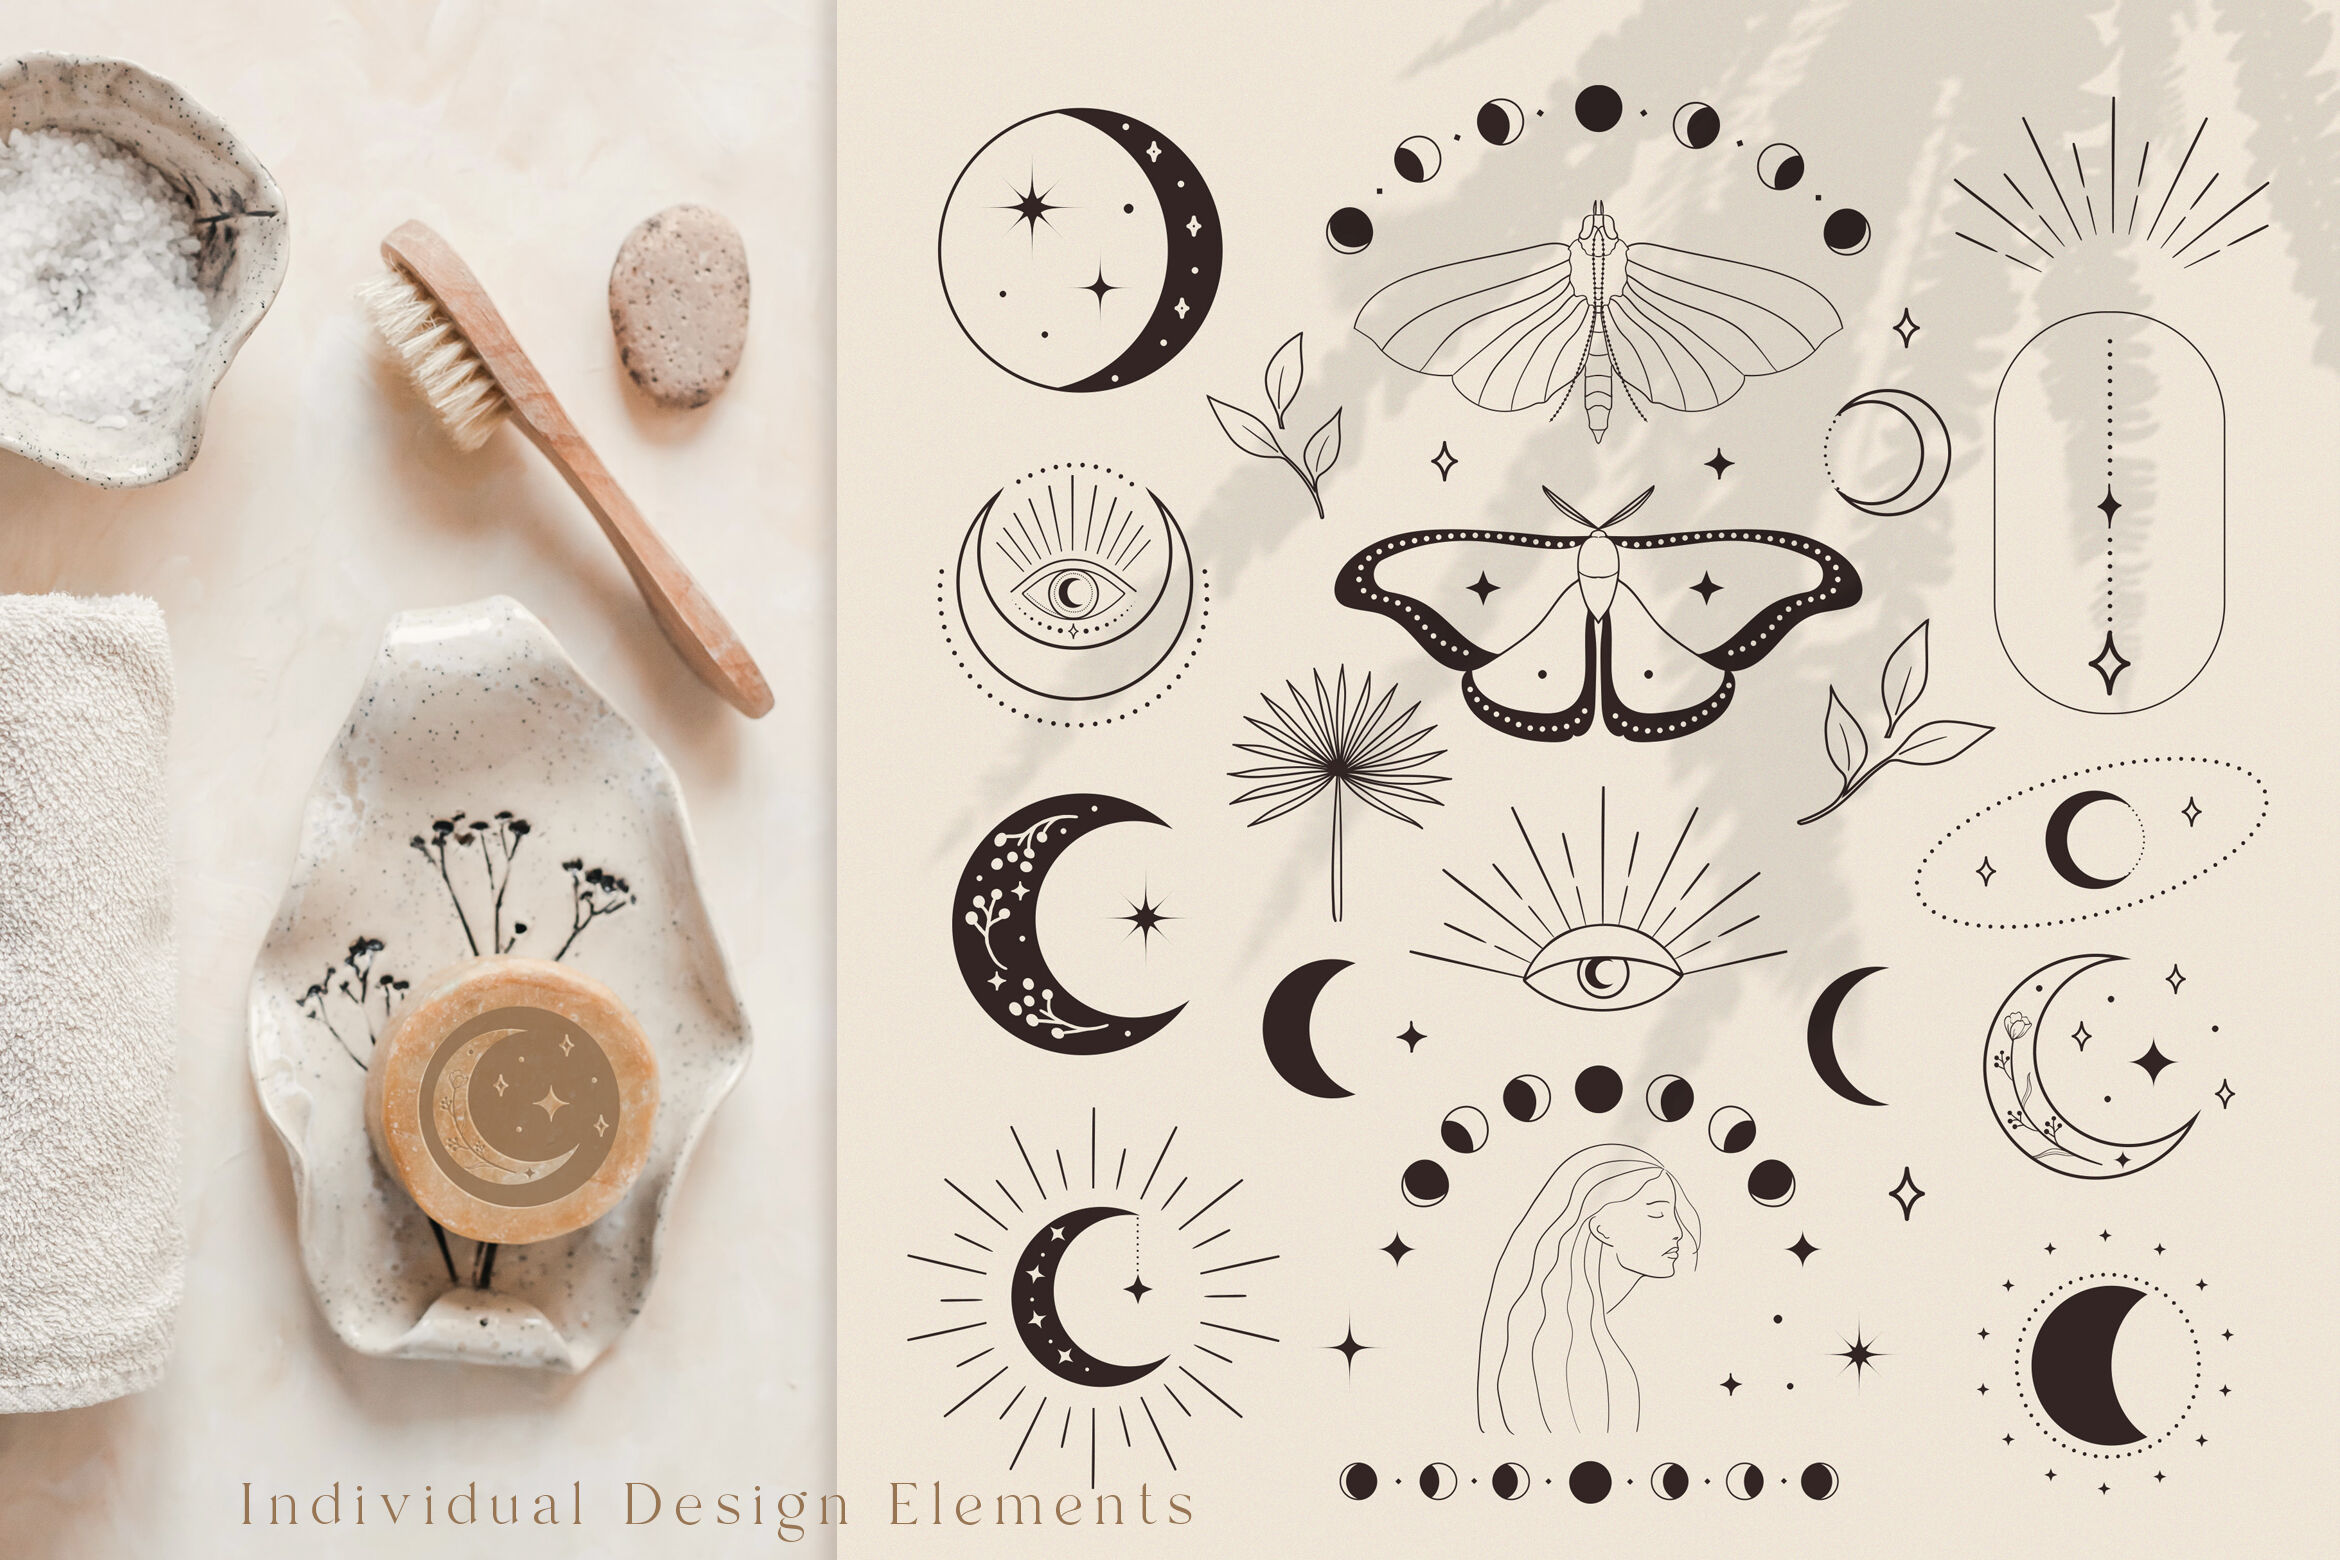 Download Divine Beauty Logo Designs Elements Patterns Esoteric Bundle Pink By O L Y A Thehungryjpeg Com